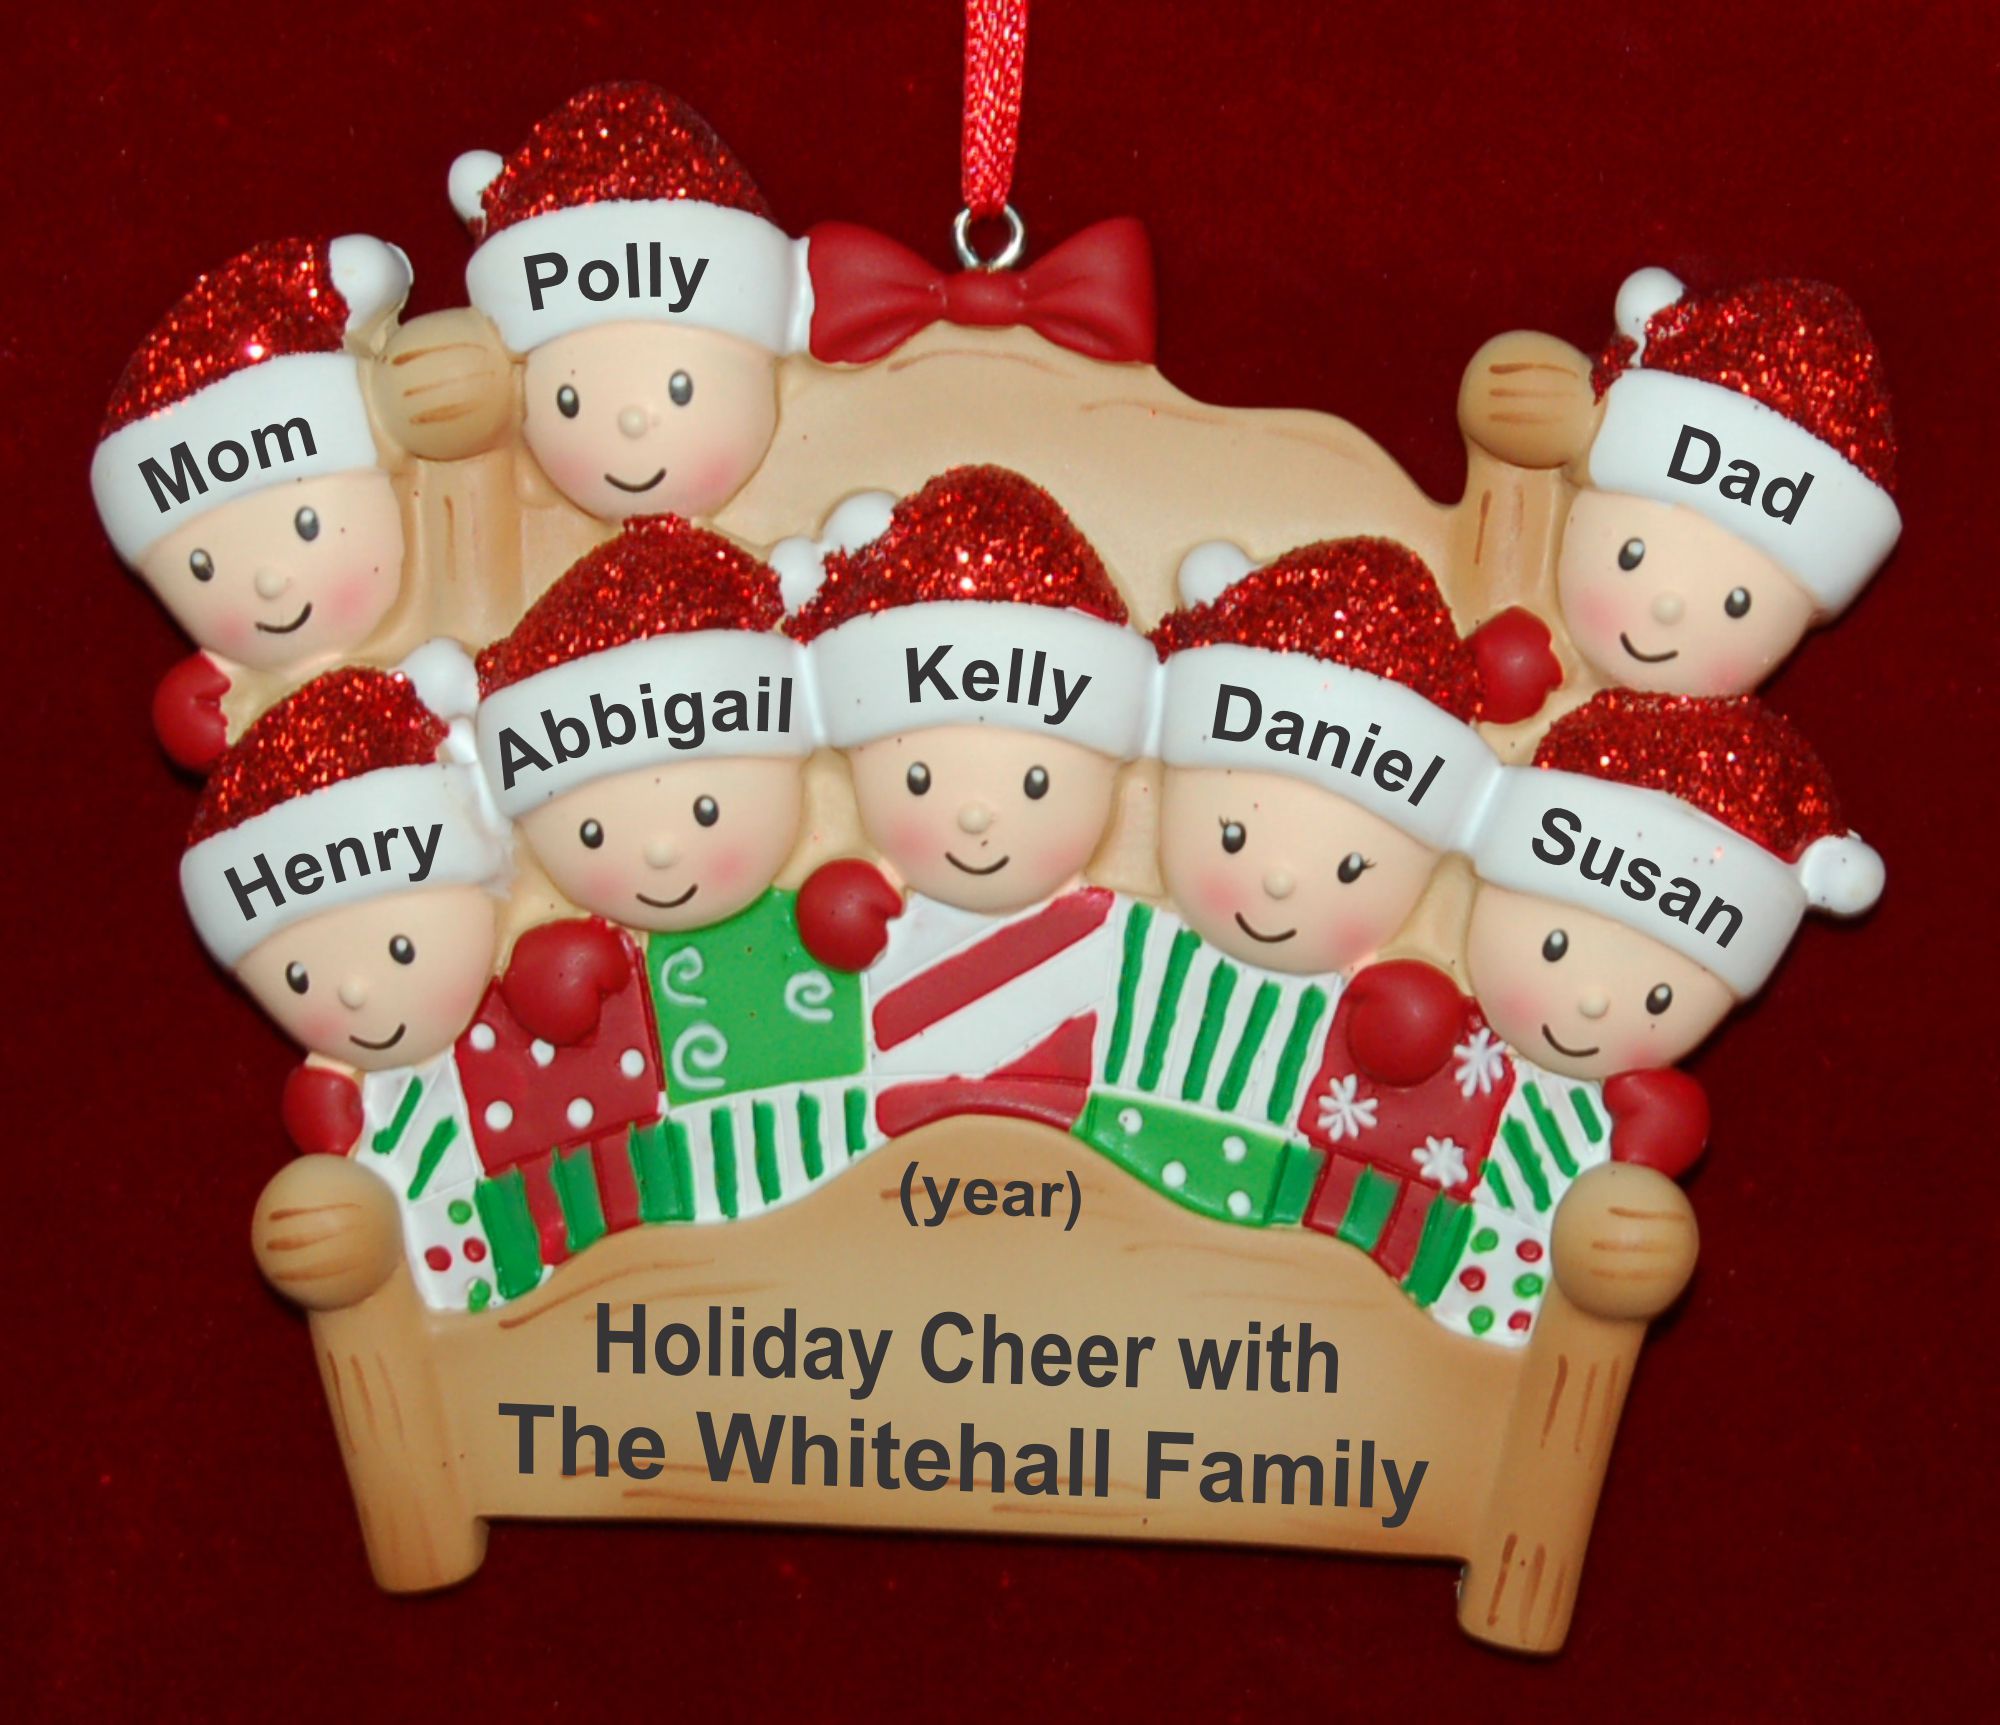 Family Christmas Ornament 4-Poster Fun for 8 Personalized by RussellRhodes.com